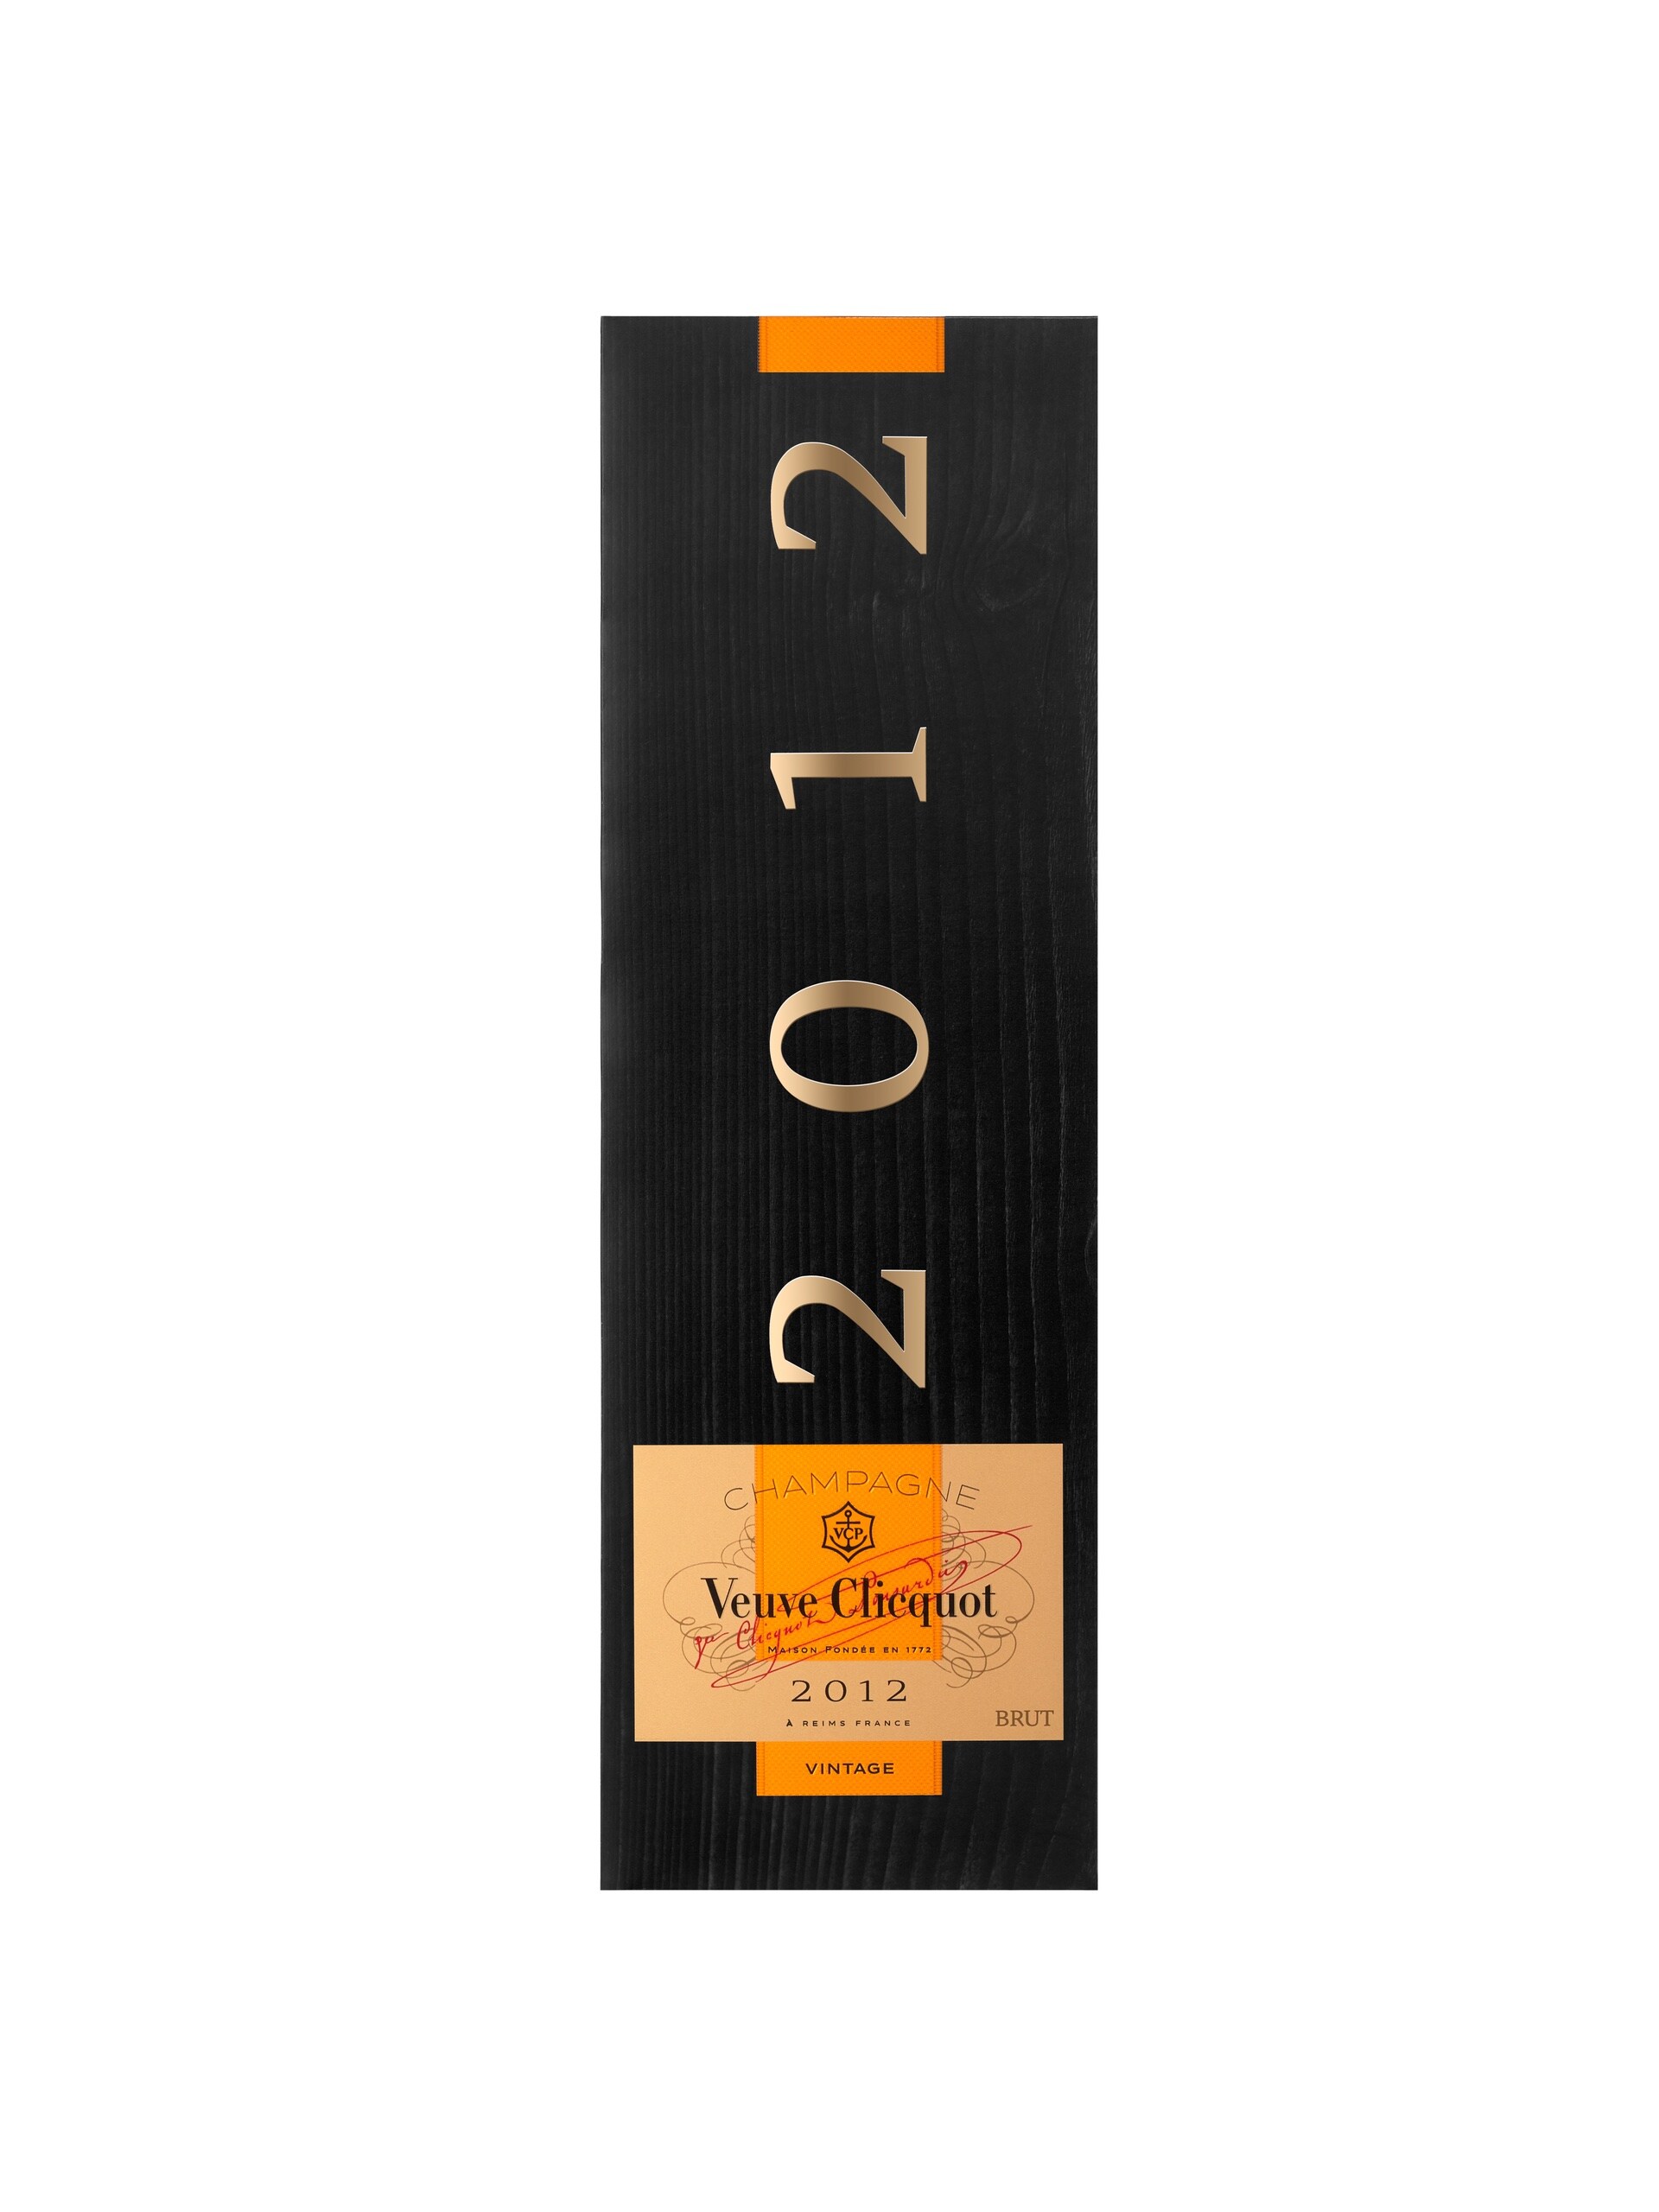 Veuve Clicquot Champagne Vintage 2012 with giftbox